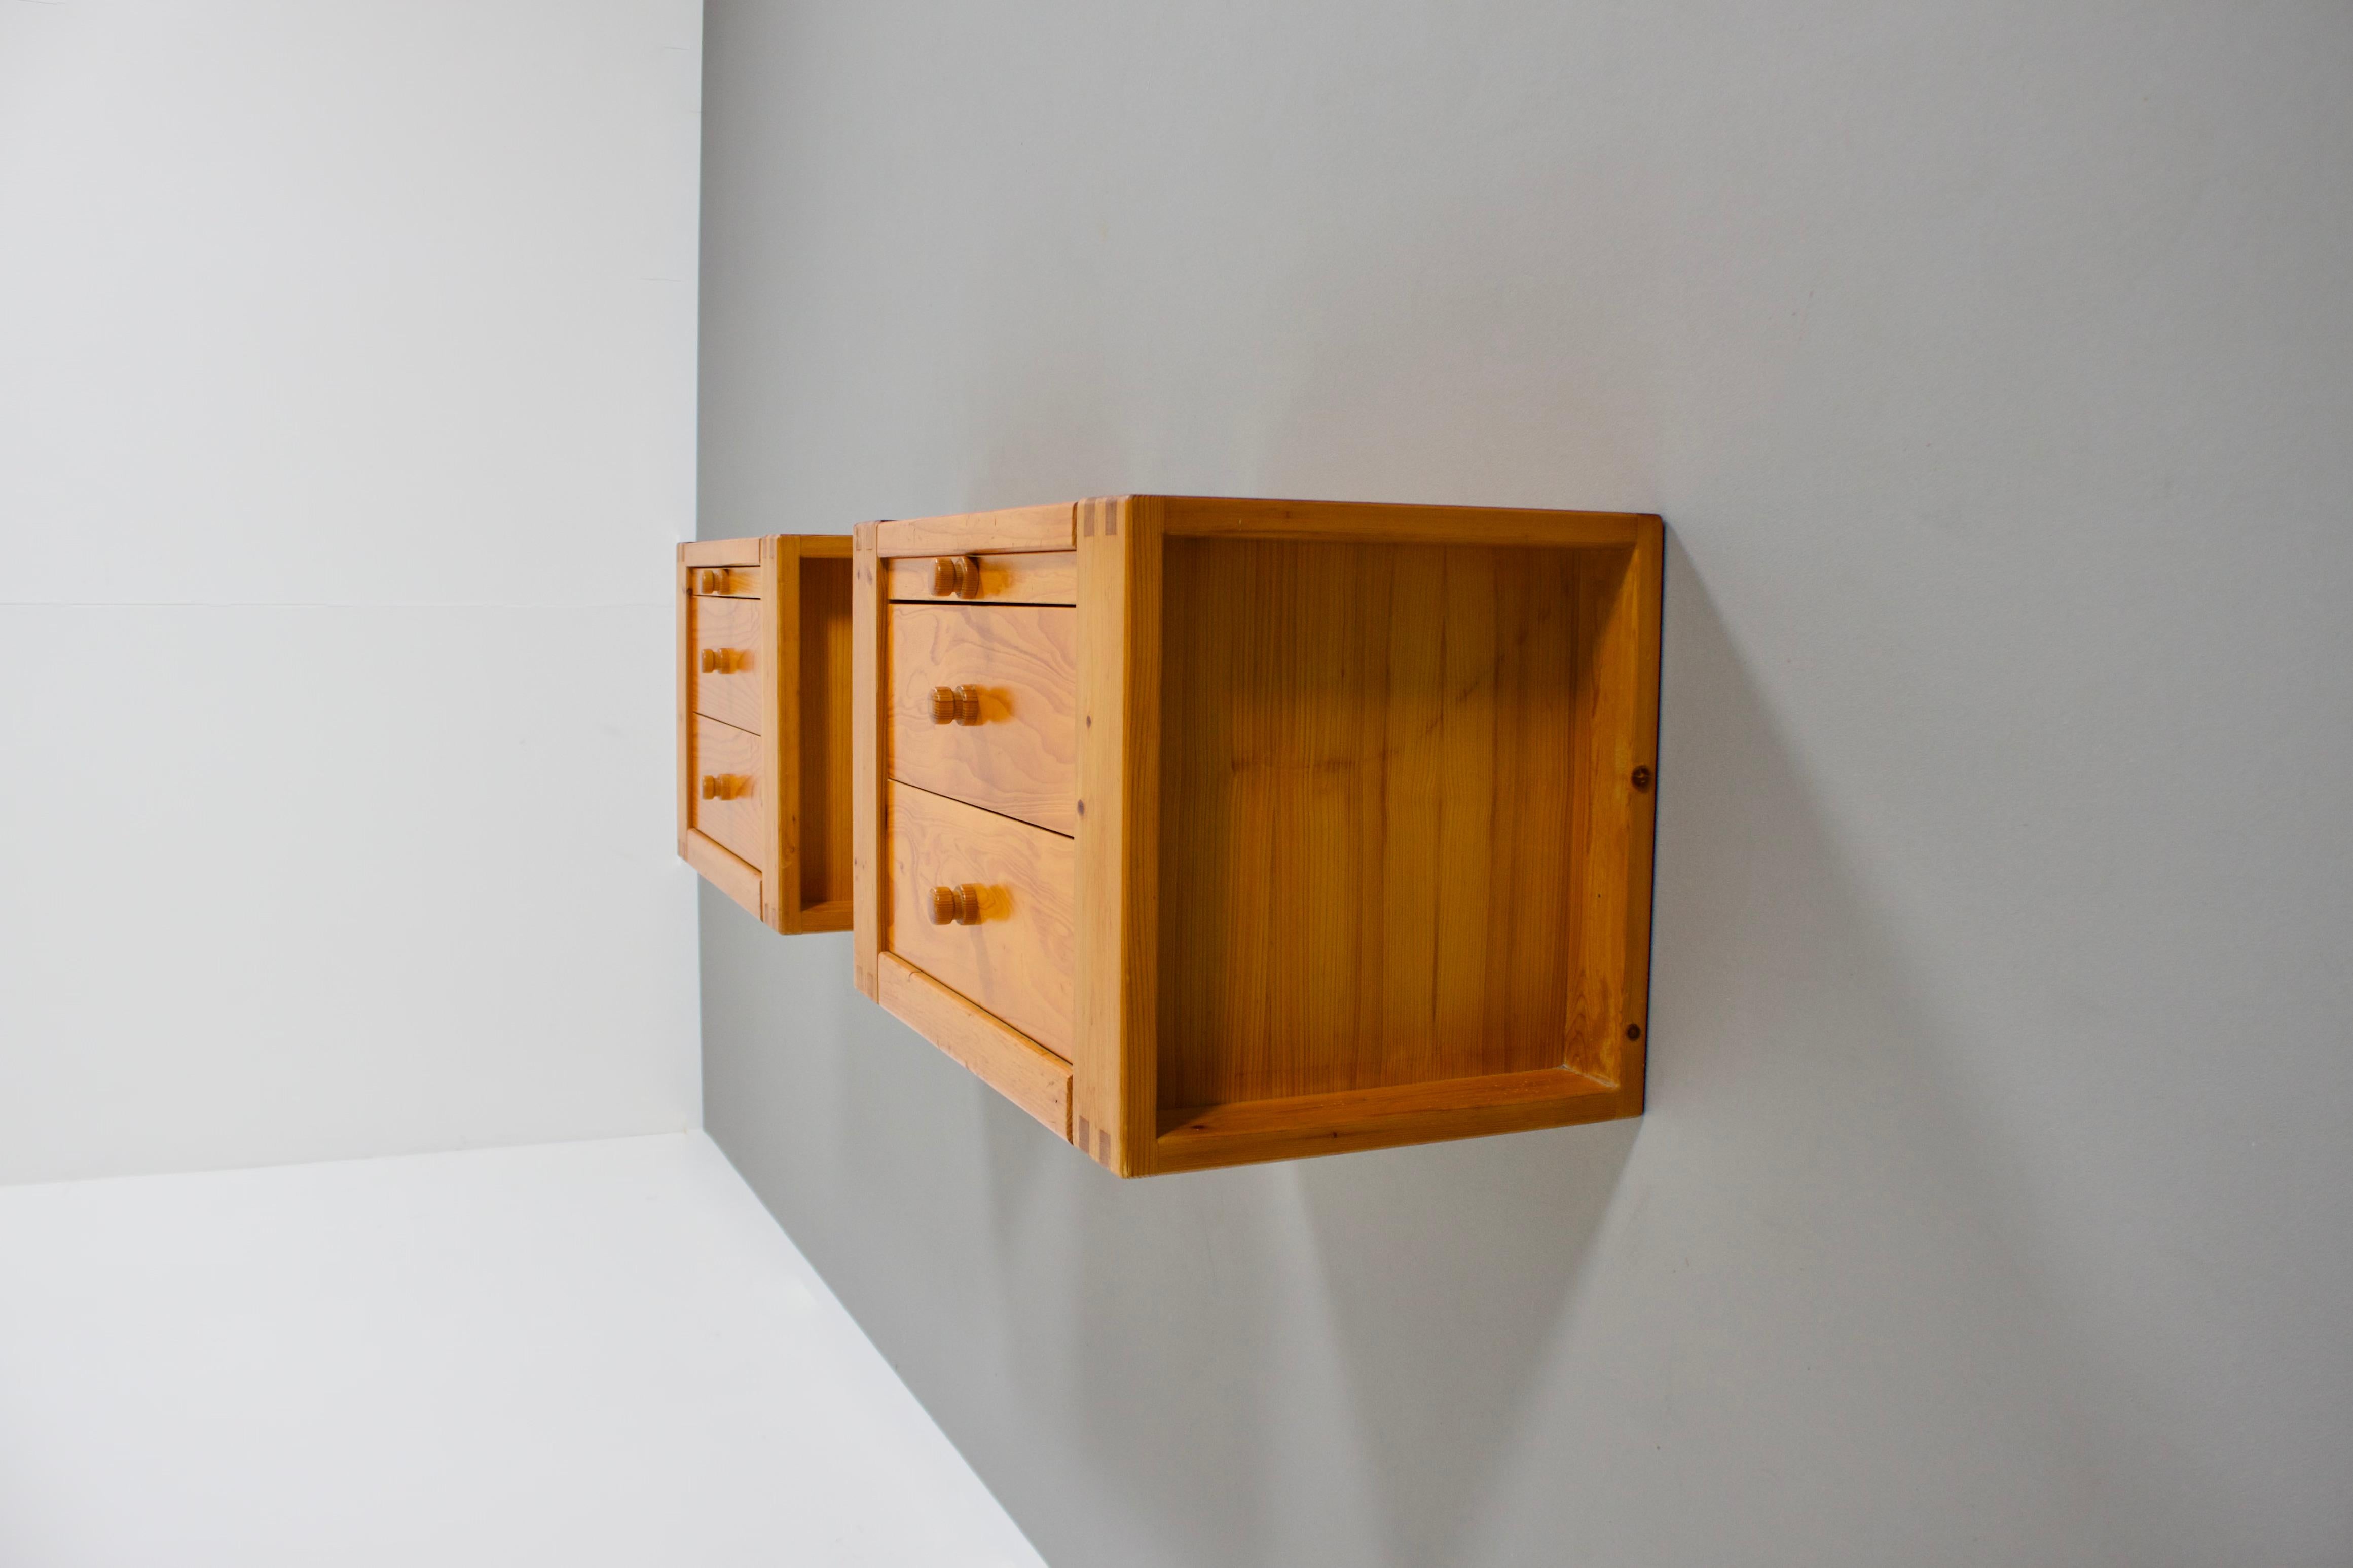 Set of small hanging cabinets in good condition.

Designed by Ate van Apeldoorn in the 1970s 

Manufactured in the Netherlands by Houtwerk Hattem

They are made of pine wood and feature the trademark ‘dove tail’ joints that’s is used by Ate in all